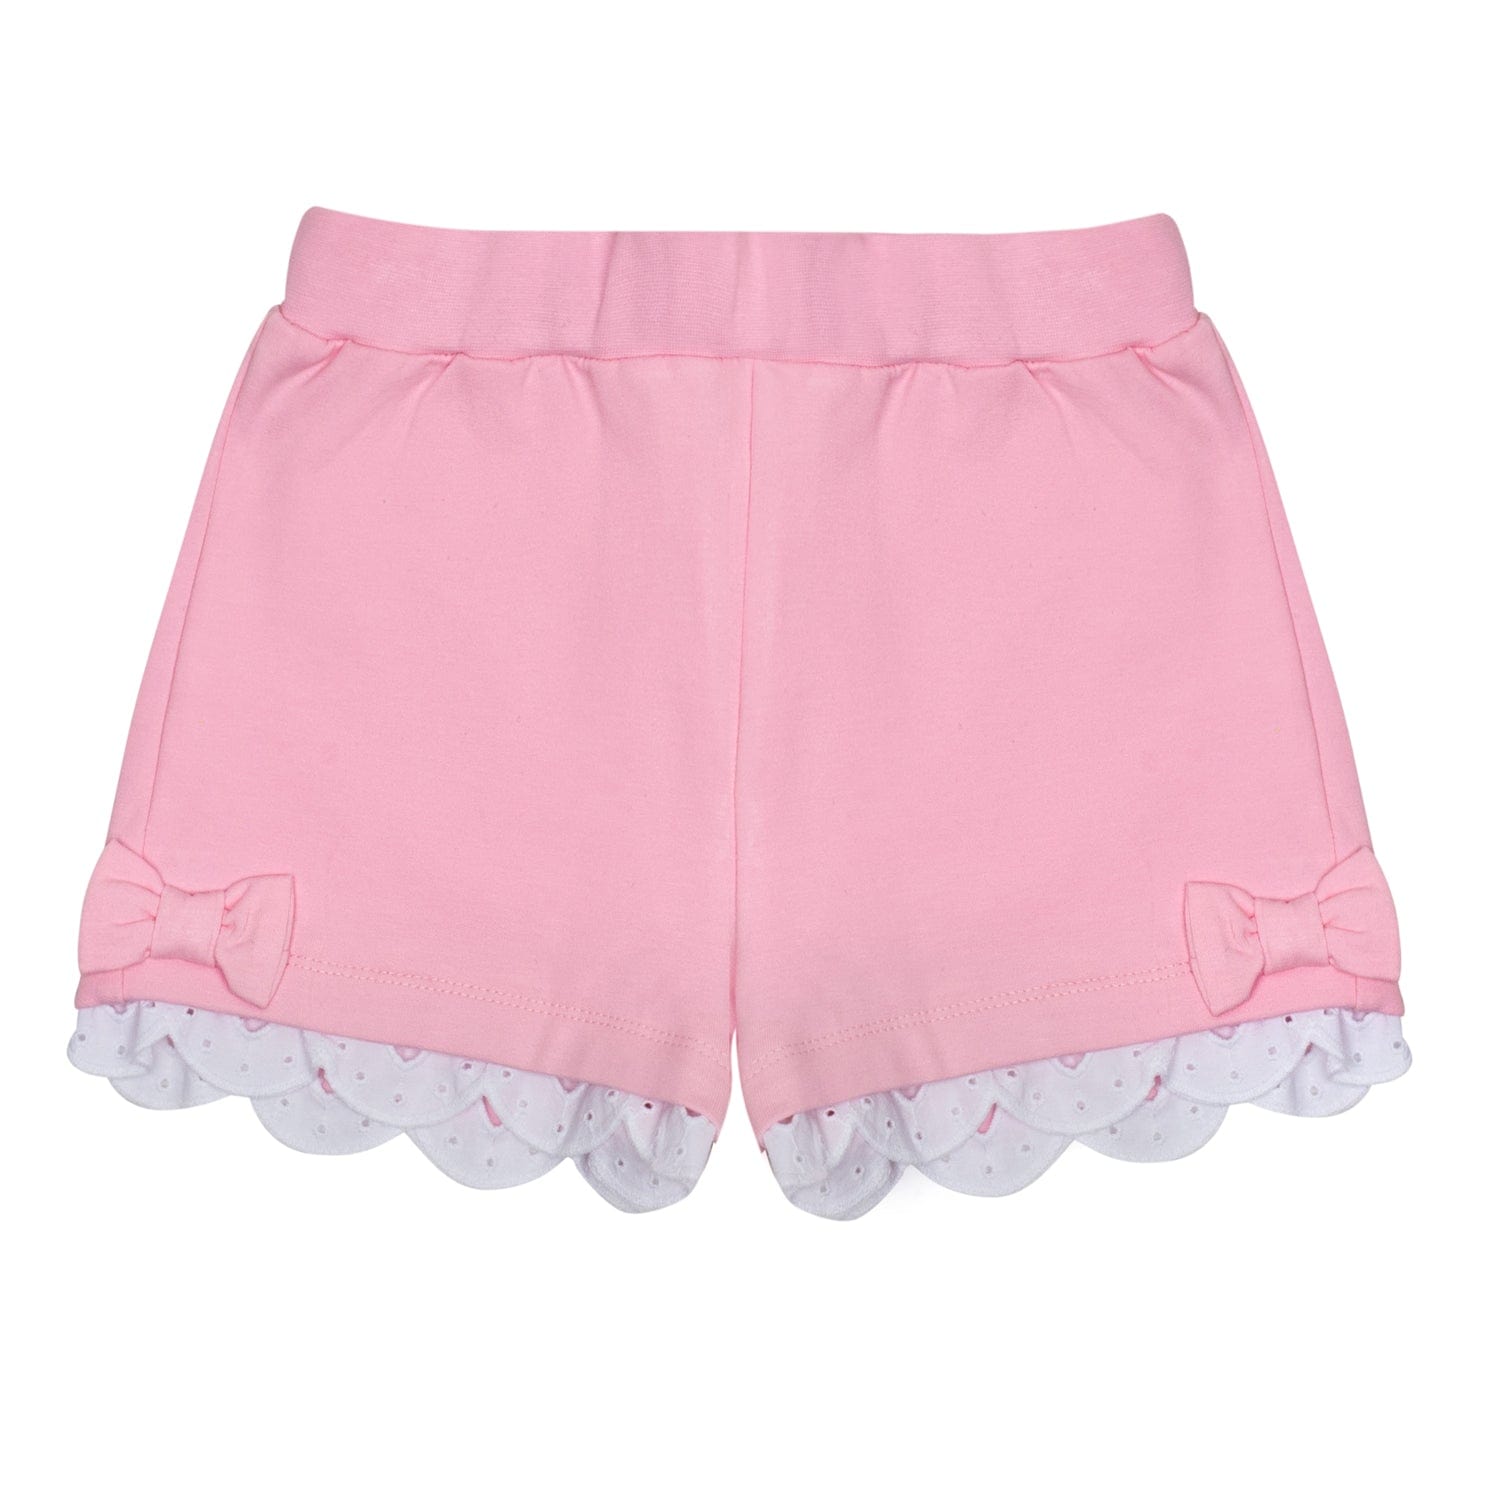 A DEE - Linda  Chic Chevron Boderie Anglaise Short Set - Pink